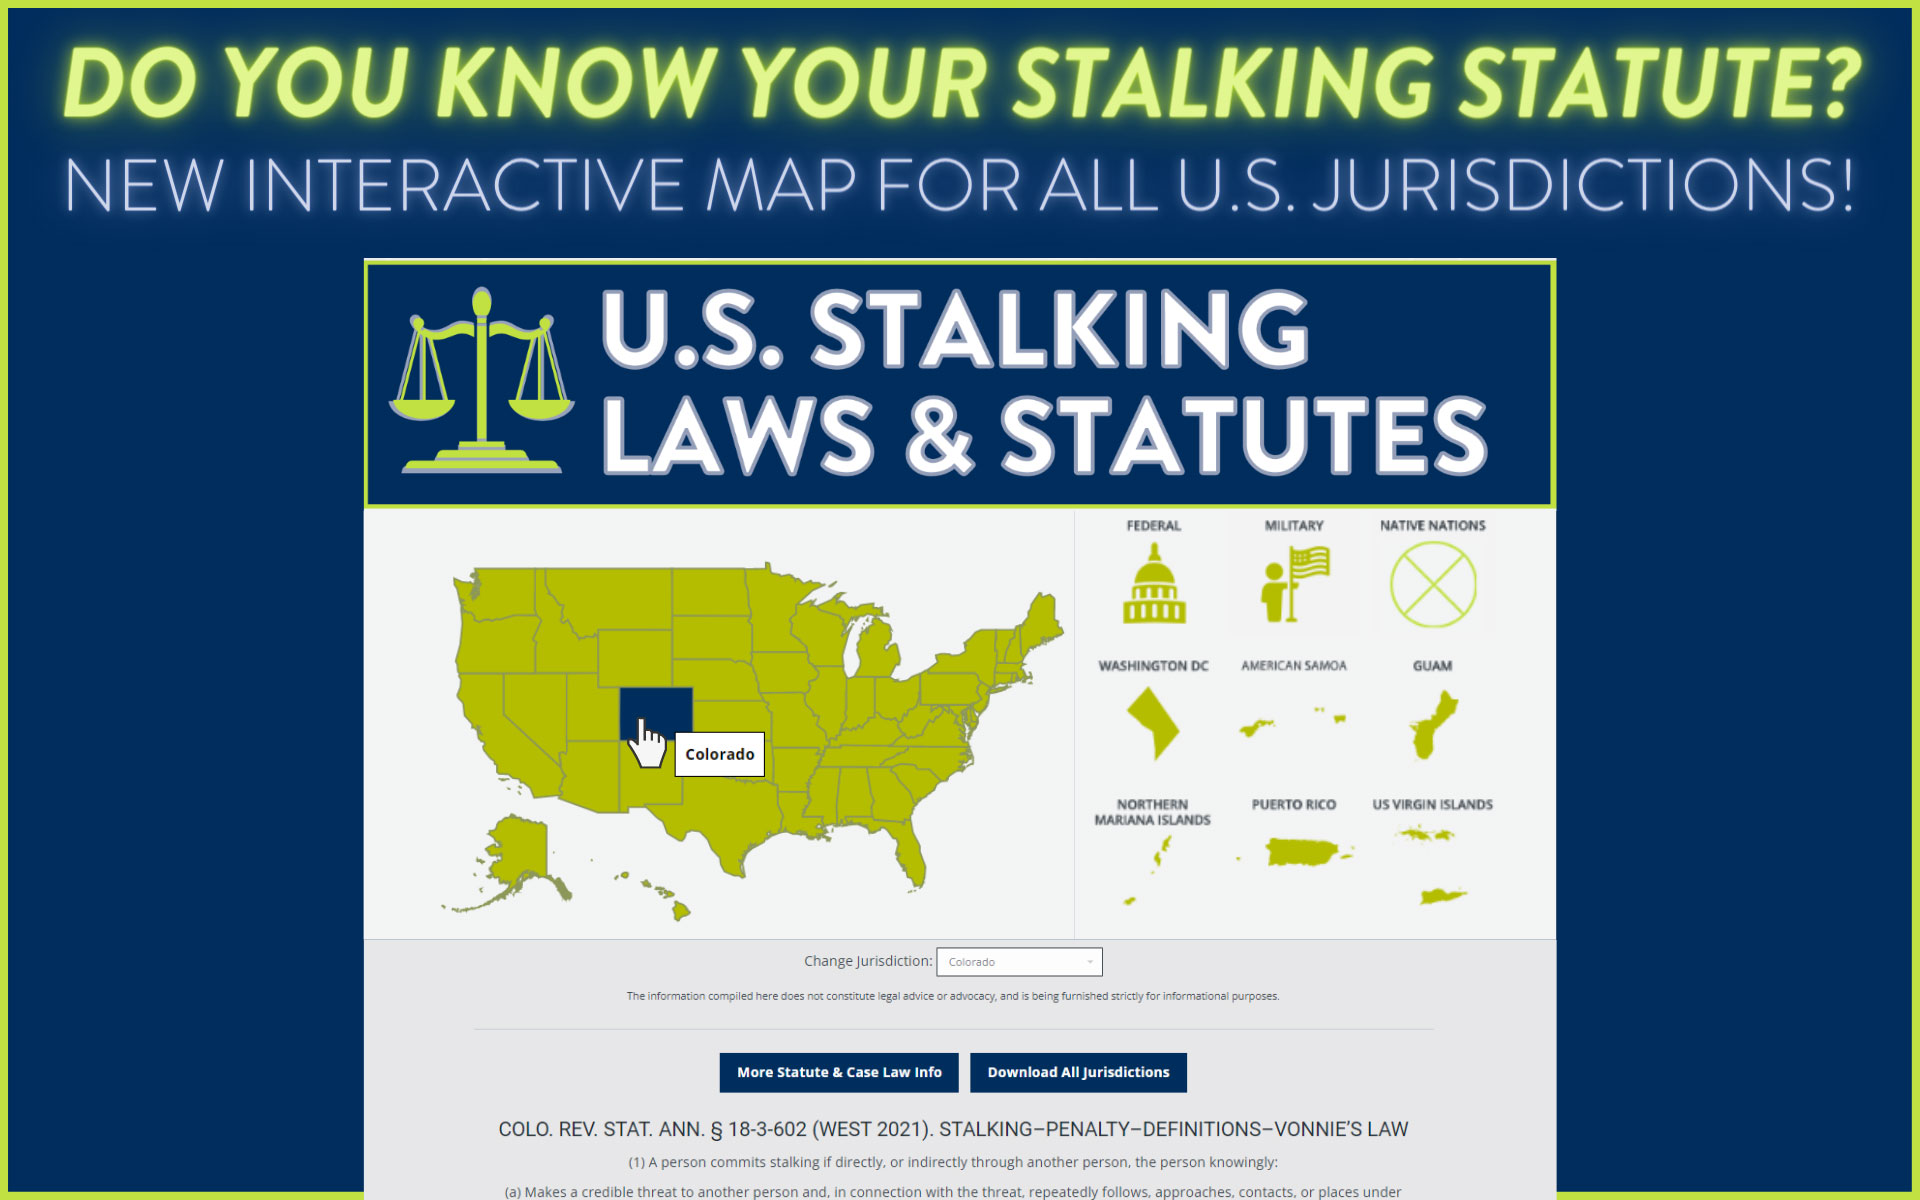 The Stalking Prevention, Awareness, and Resource Center | SPARC